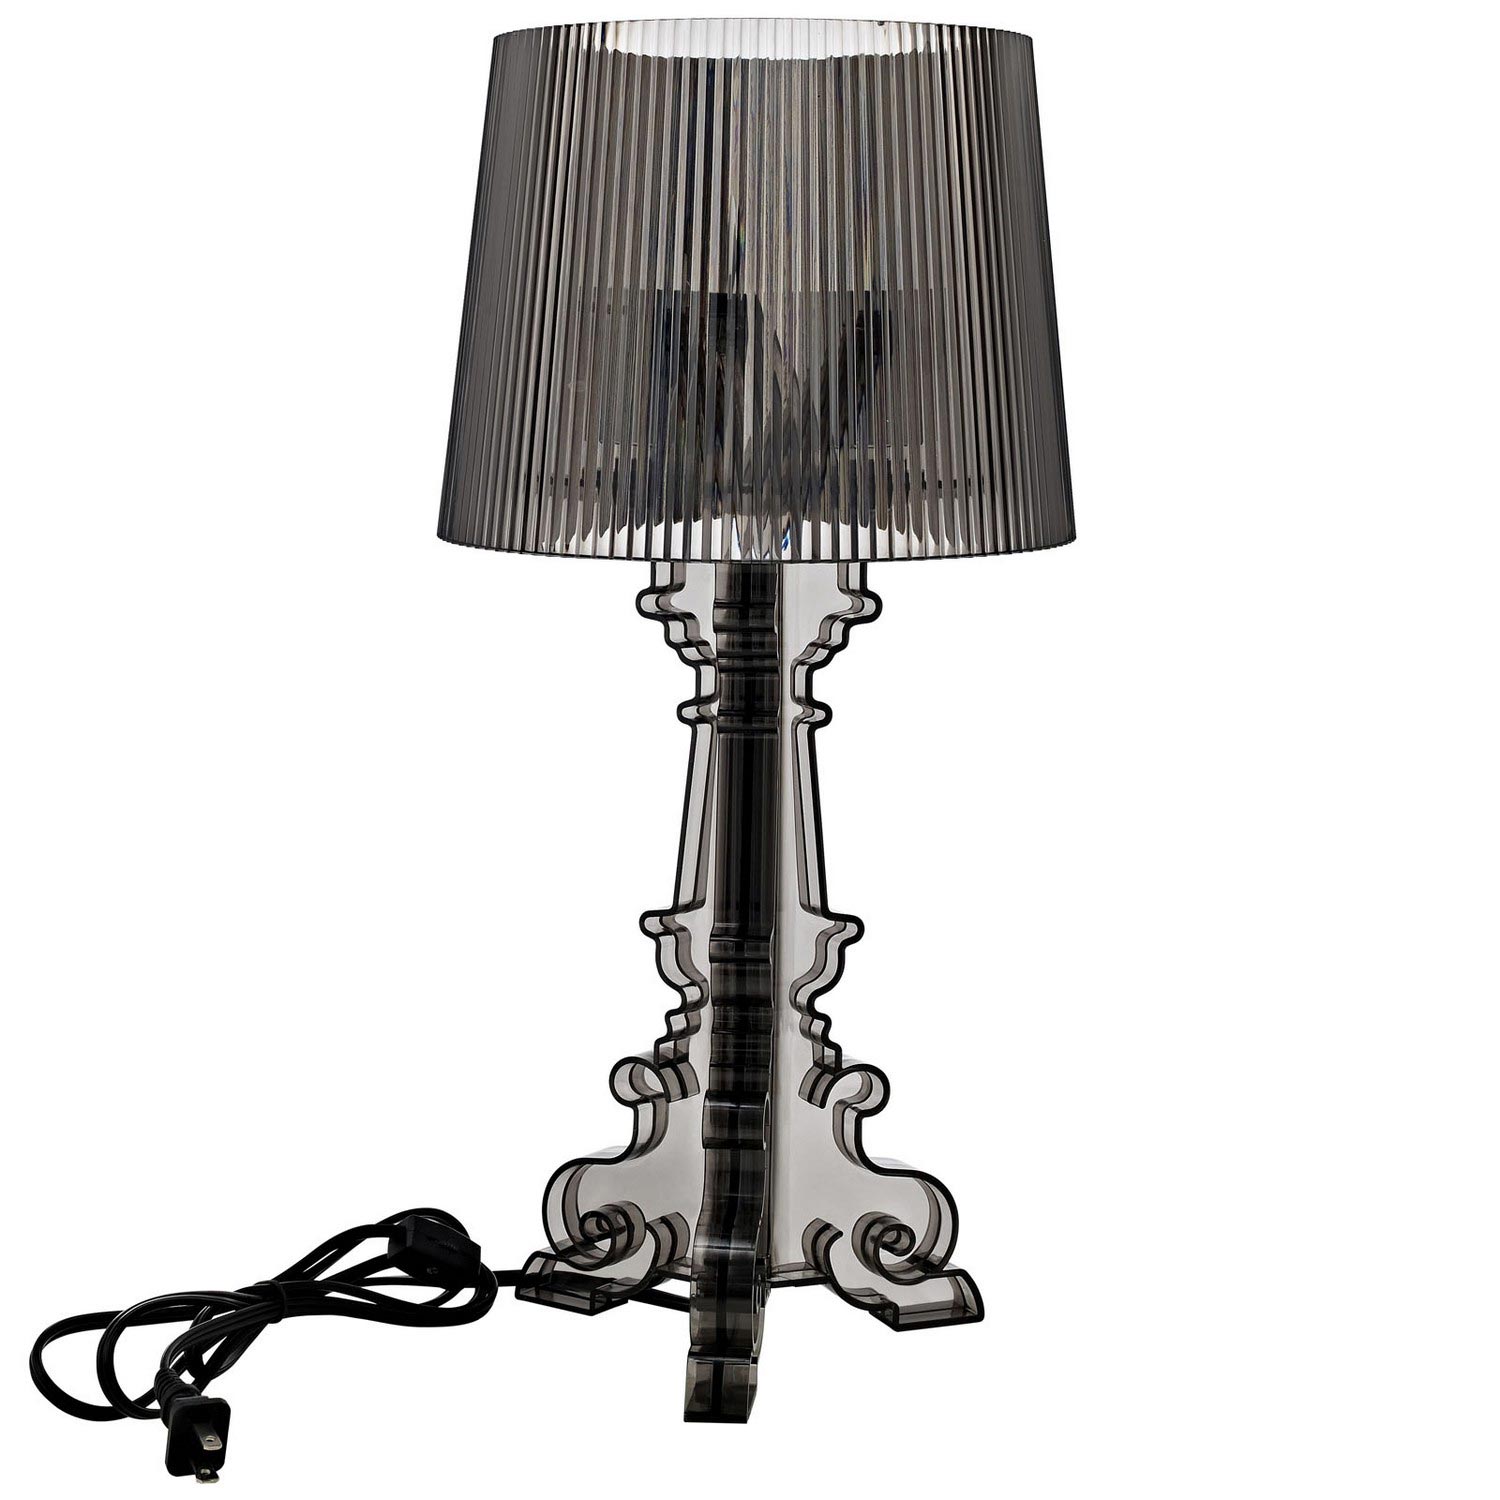 Modway French Petit Table Lamp - Black